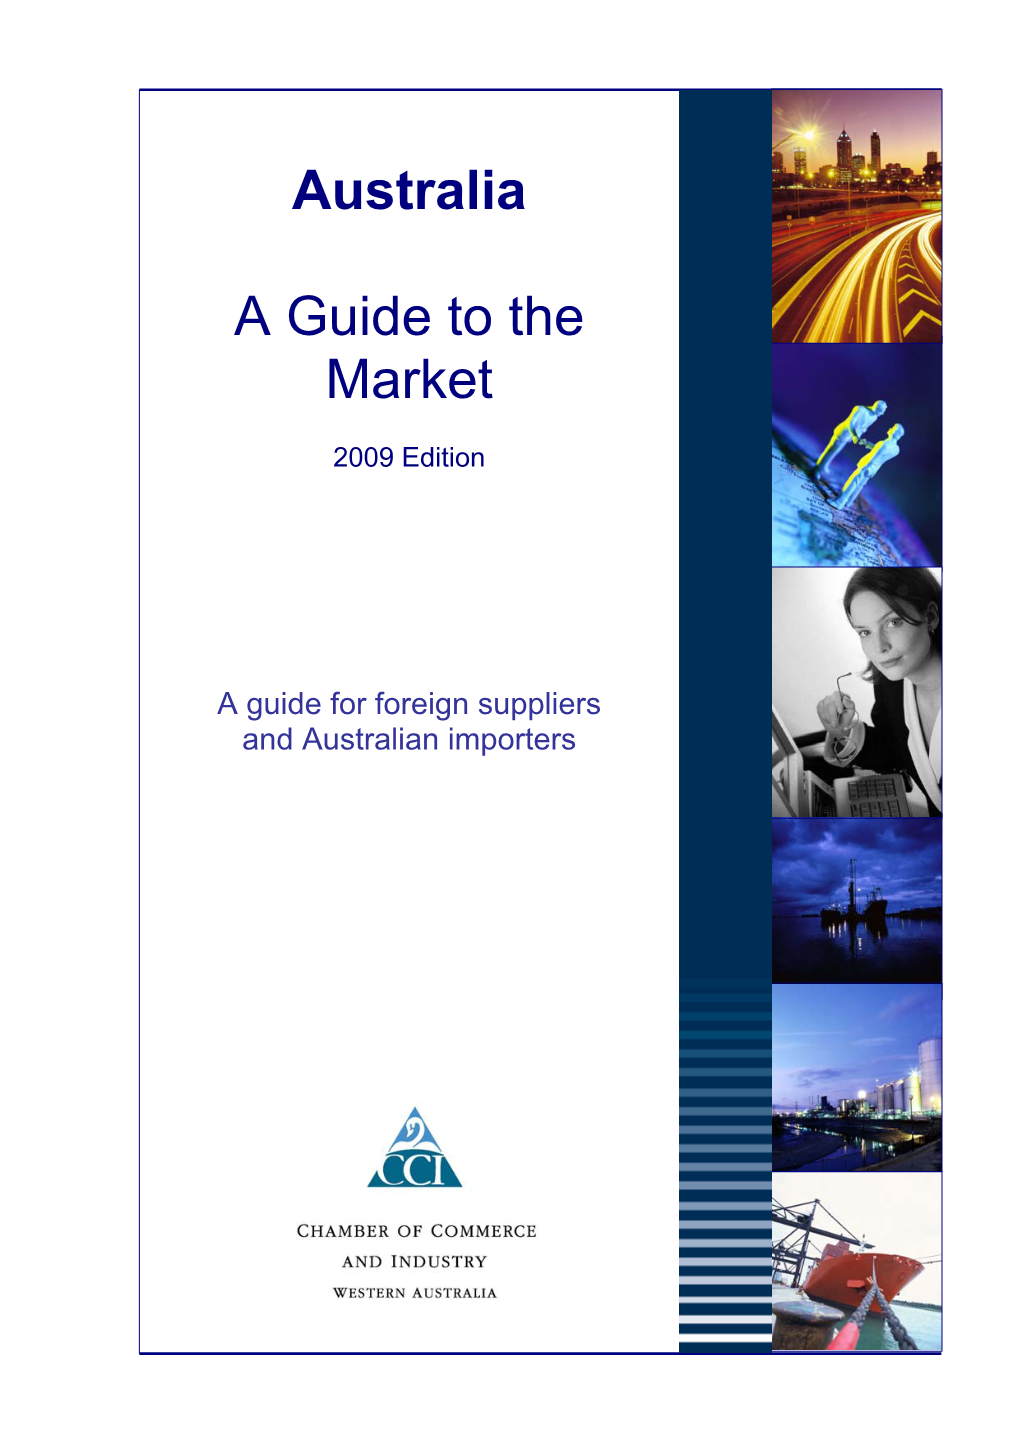 Australia a Guide to the Market